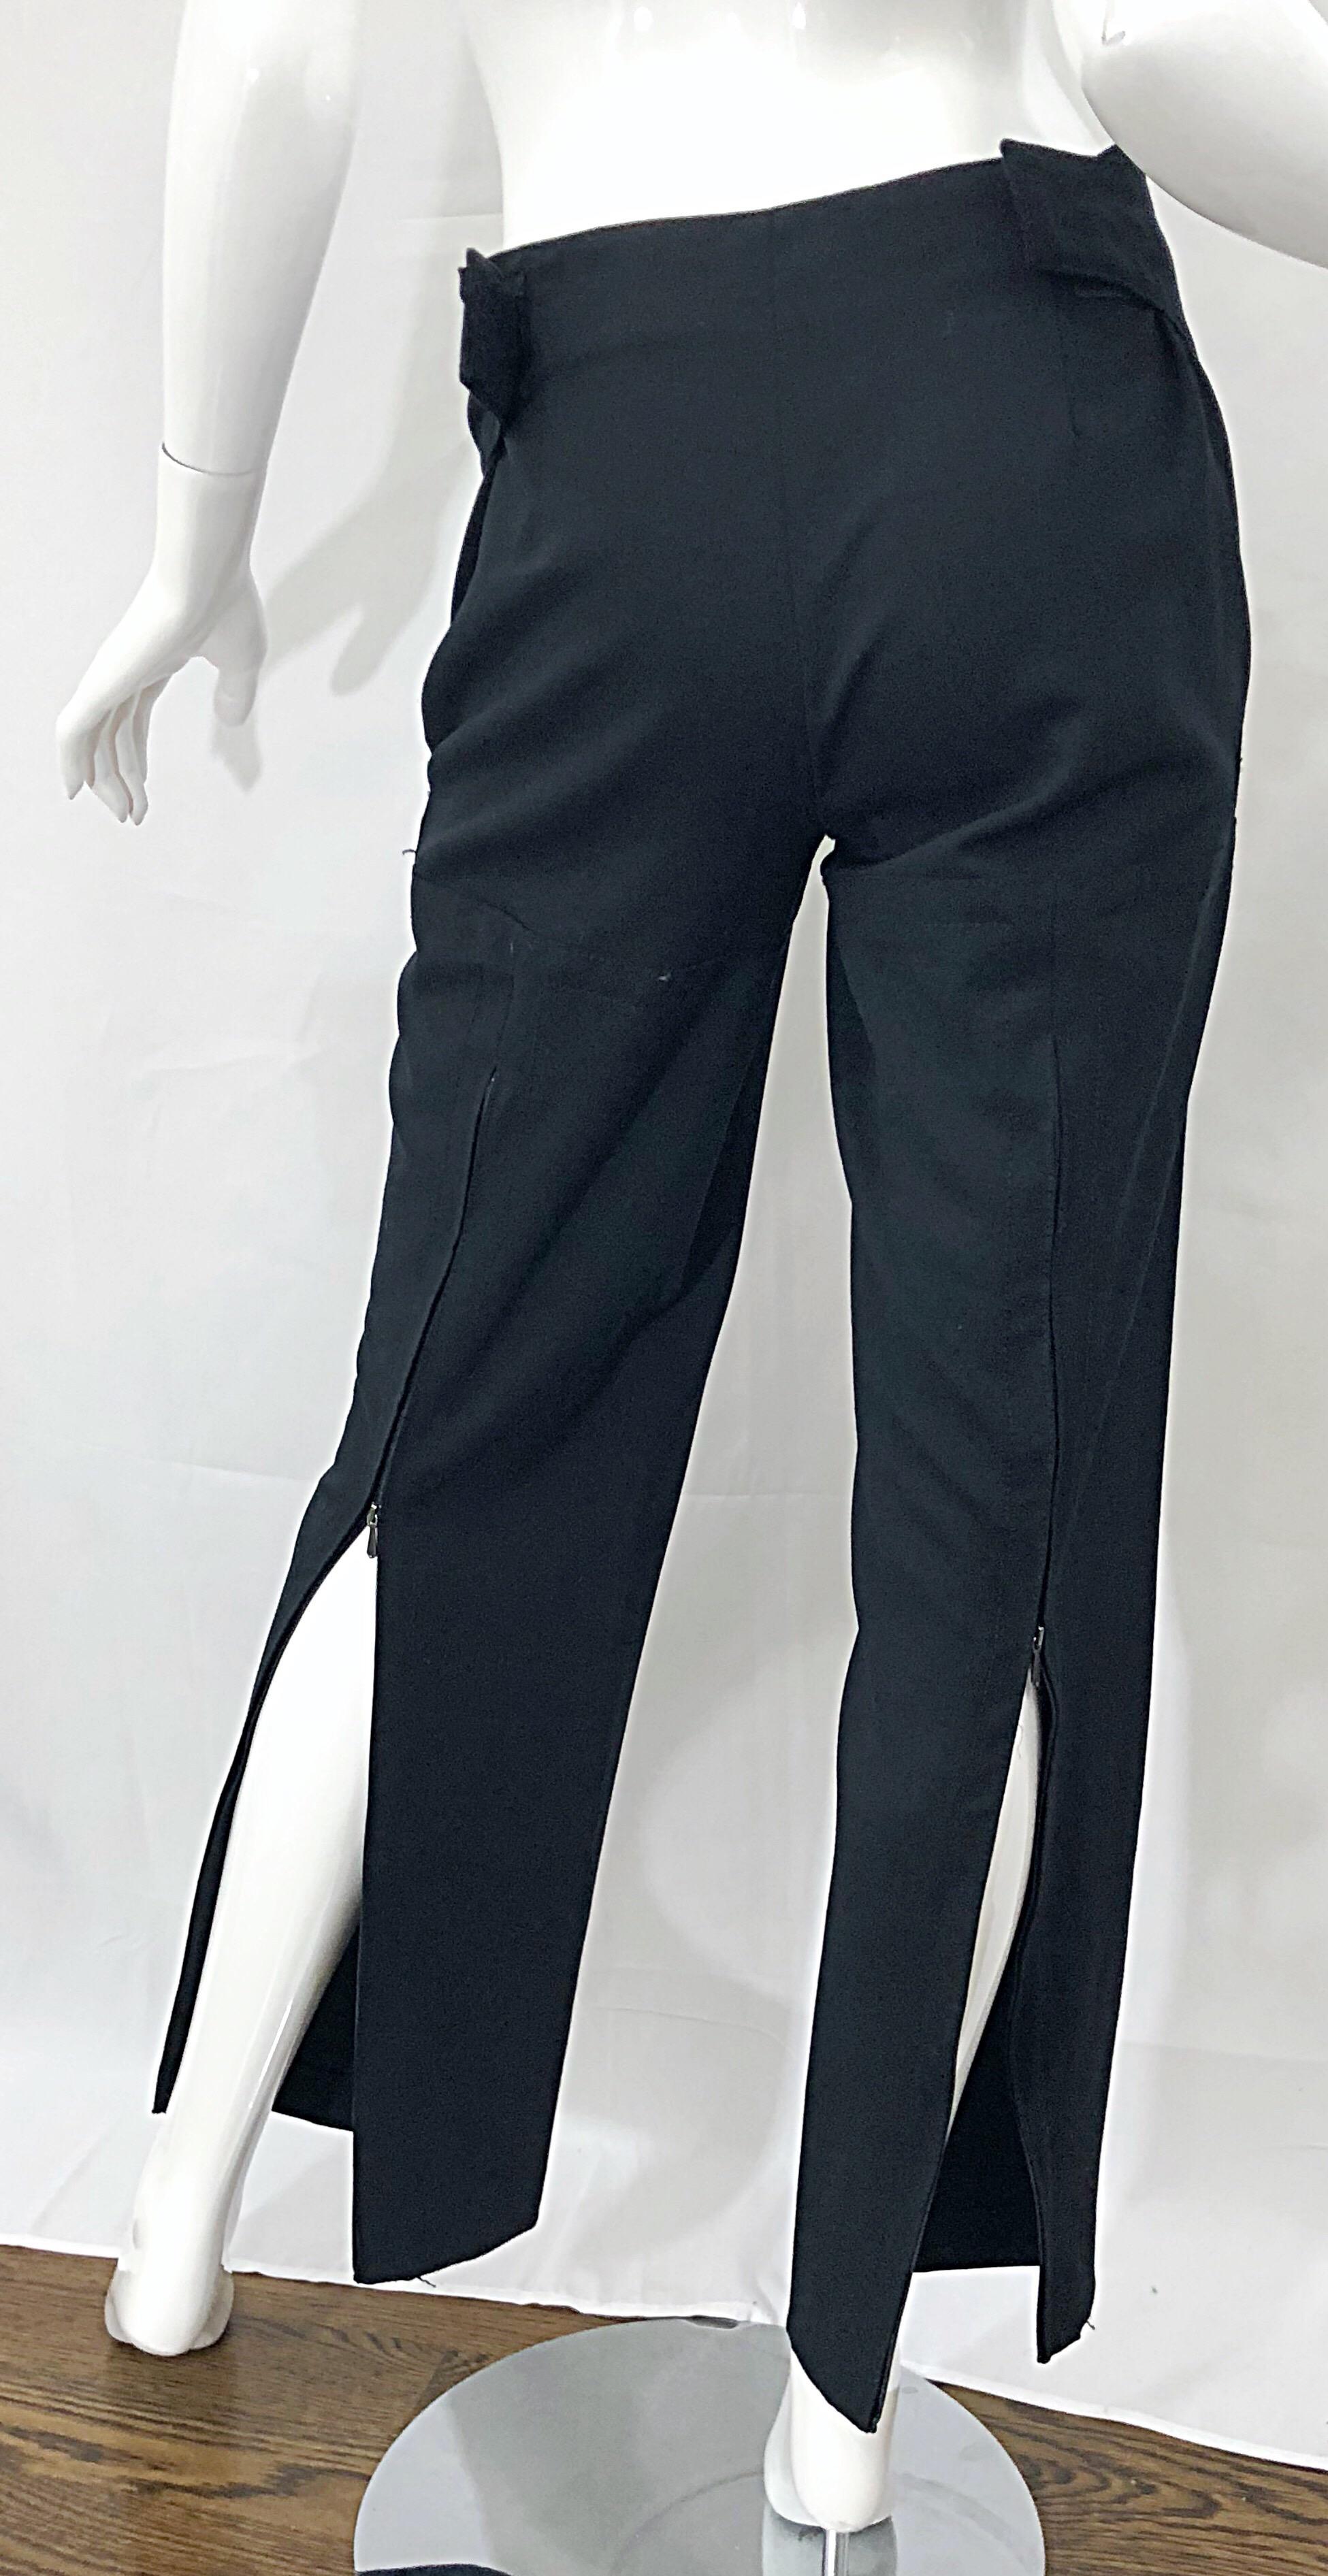 Dirk Bikkembergs Size 44 Rare Zip Up Black Wool Blend High Waisted Trousers For Sale 1